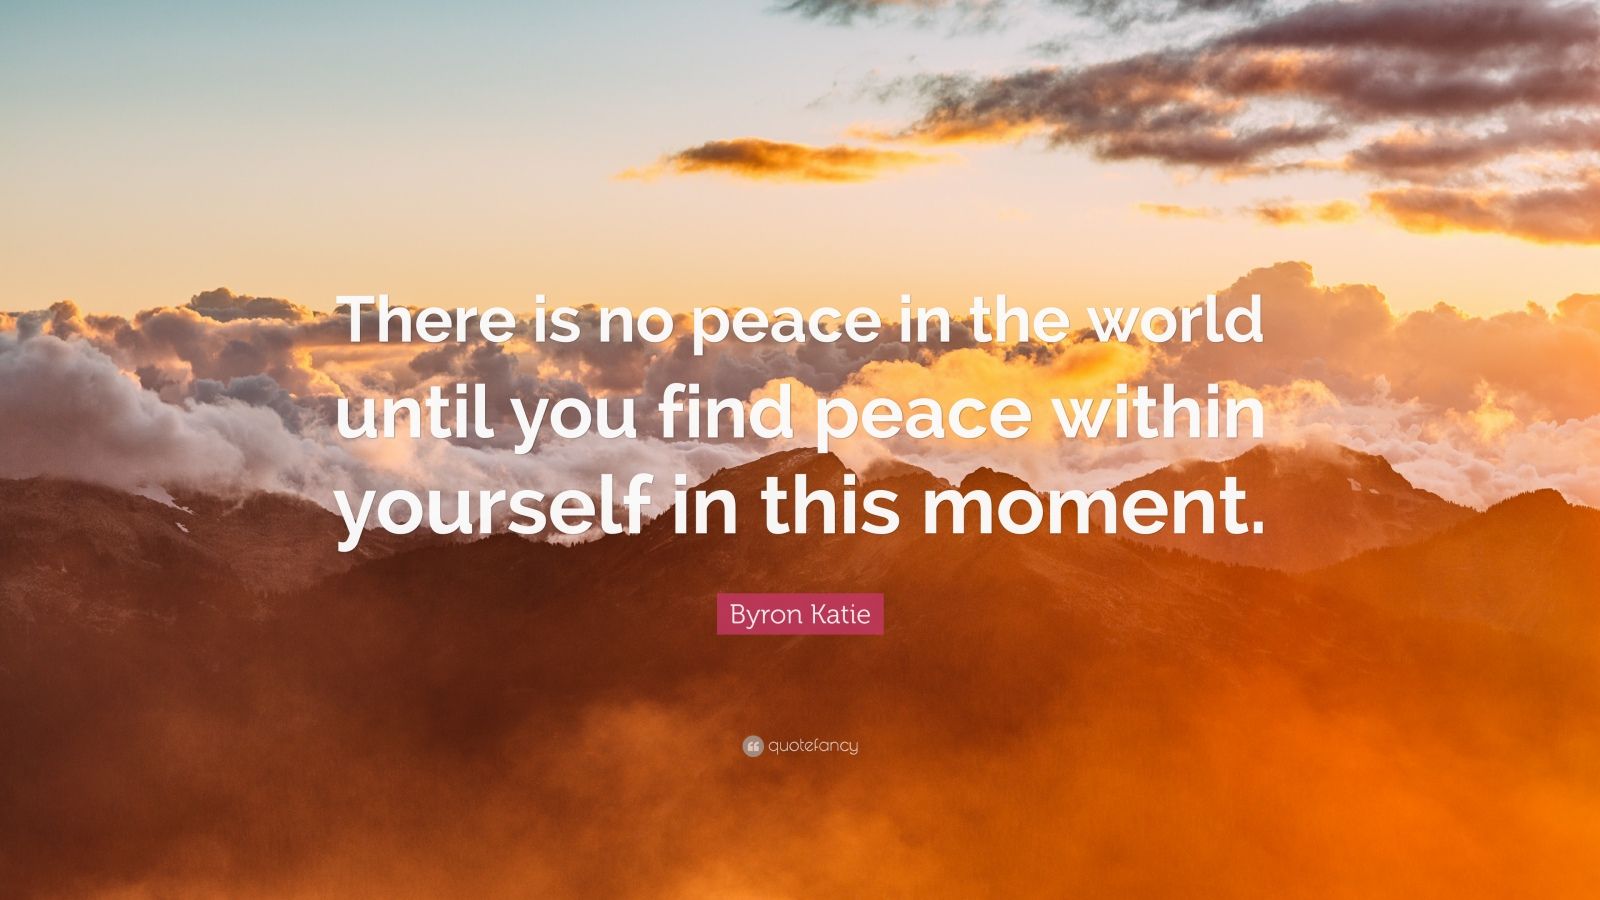 Byron Katie Quote: “There is no peace in the world until you find peace